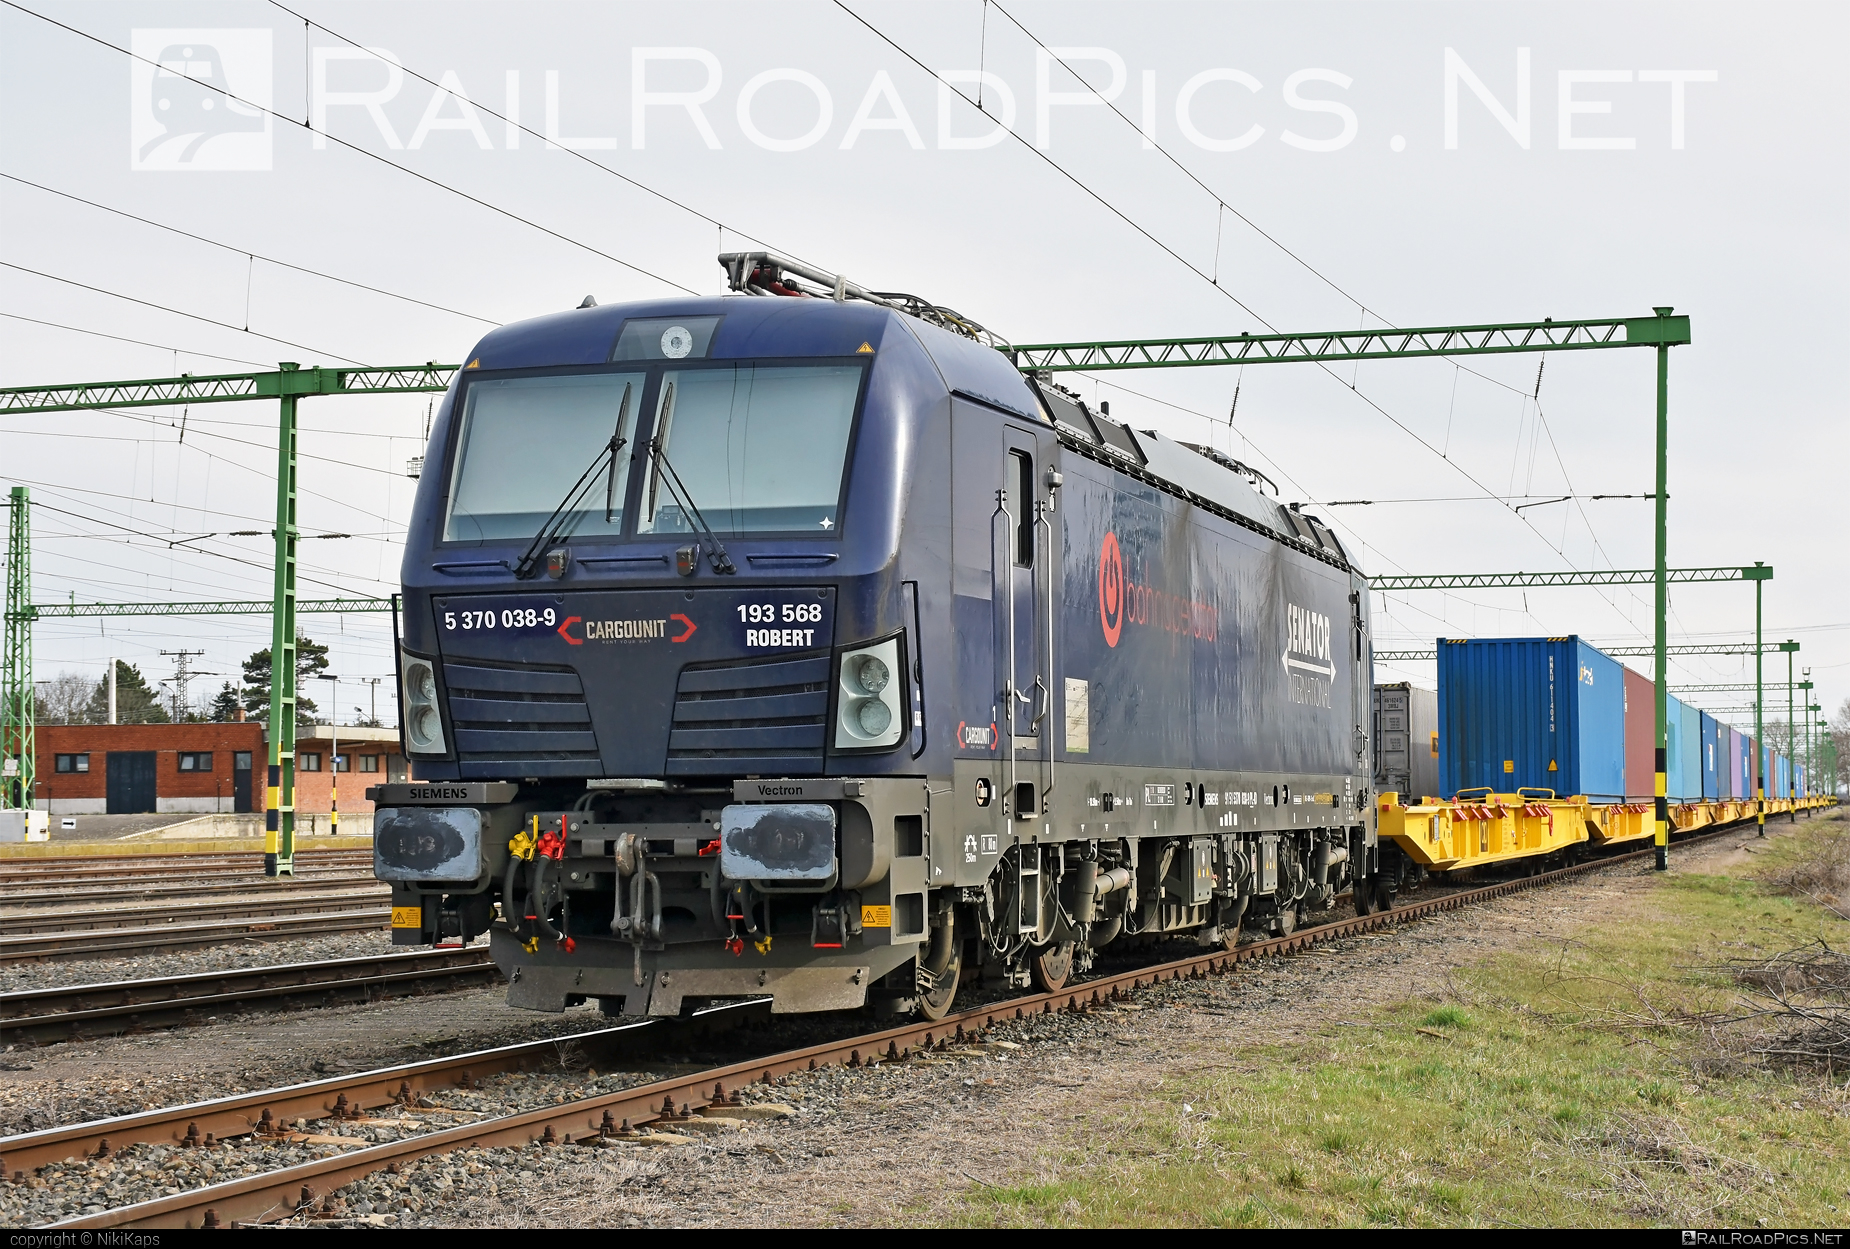 Siemens Vectron MS - 5 370 038-9 operated by LTE Logistik und Transport GmbH #IndustrialDivision #bahnoperator #cargounit #container #flatwagon #lte #ltelogistikundtransport #ltelogistikundtransportgmbh #siemens #siemensVectron #siemensVectronMS #vectron #vectronMS